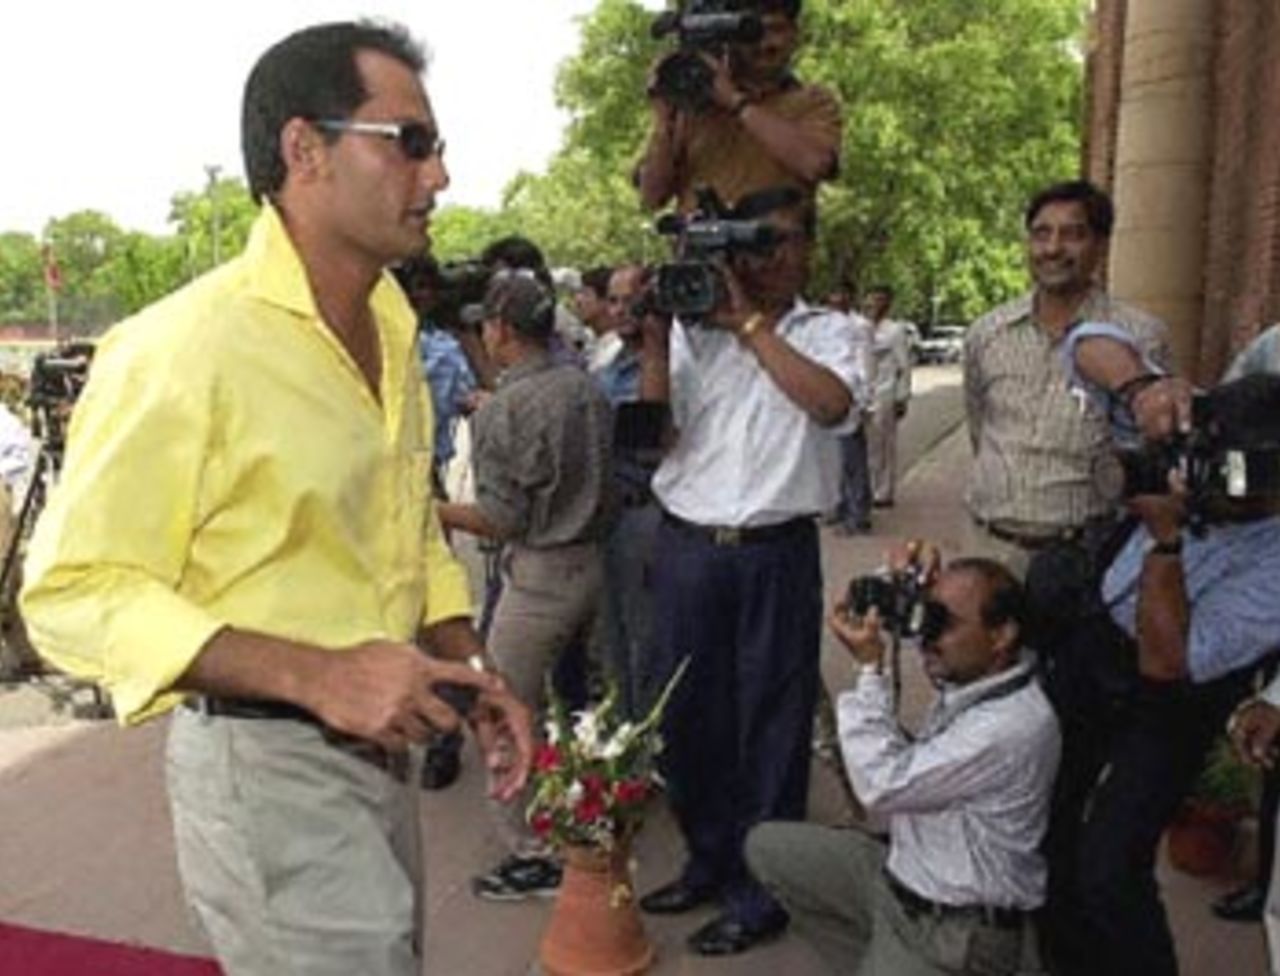 Former Indian cricket captain Mohammad Azharuddin arrives for a meeting between government officials, cricket administrators and players in a bid to address match fixing allegations in the wake of South African skipper Hansie Cronje's dismissal over bribery charges. Indian Sports Minister Sukhdev Singh Dhindsa said it was likely that the government would launch its own investigation into the allegations that some Indian players may be guilty of match fixing.